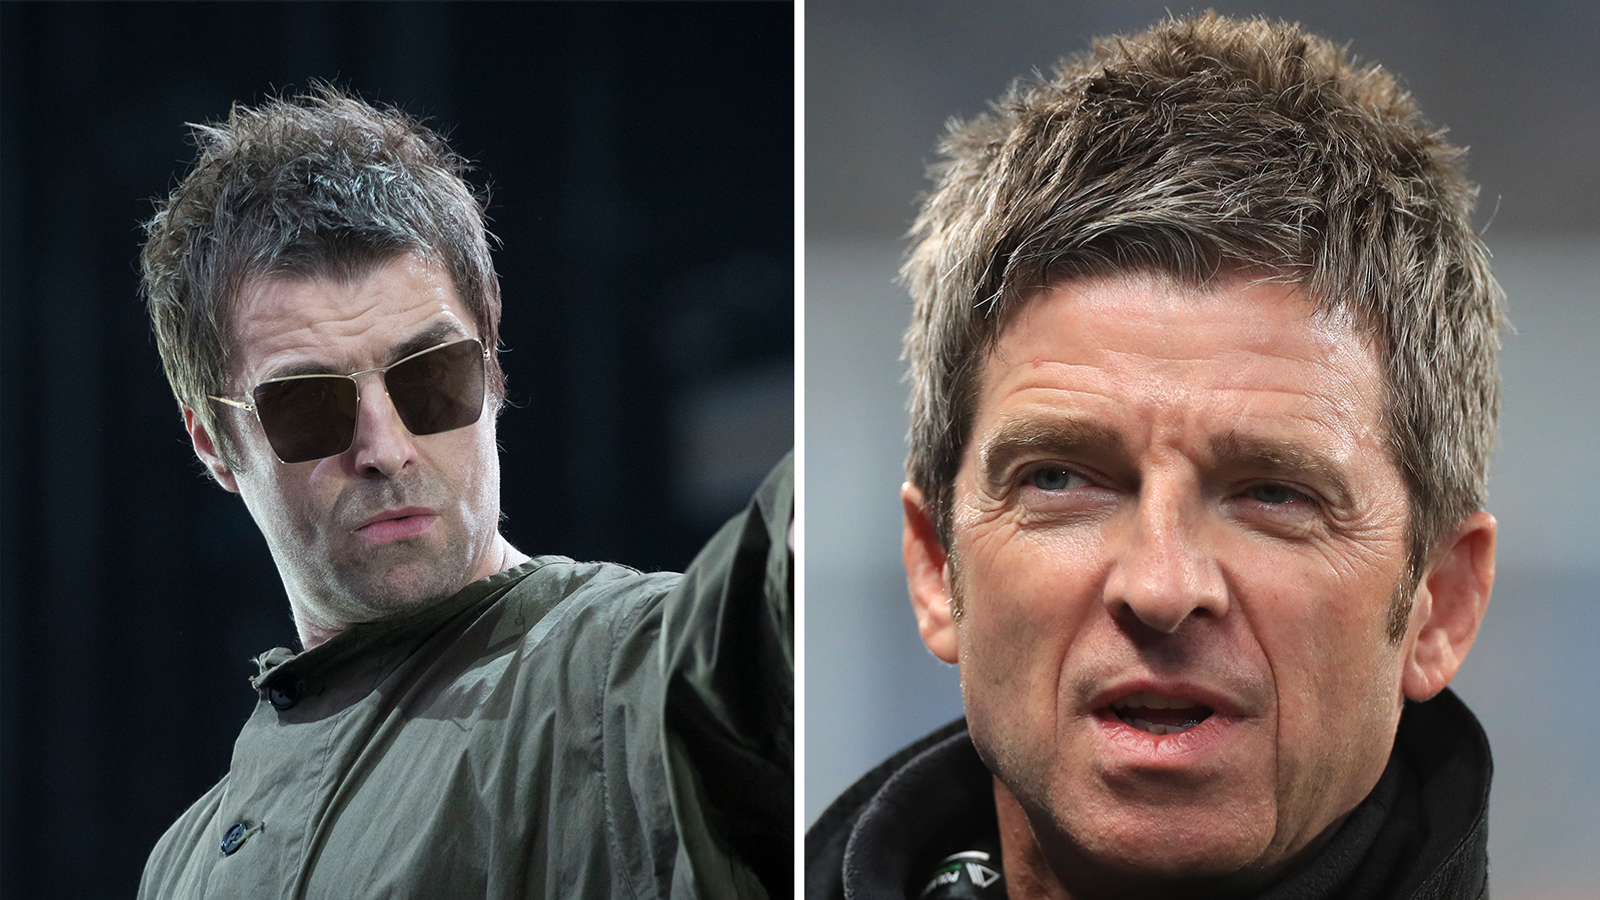 Oasis fans think reunion may be on cards after Noel Gallagher's latest comments